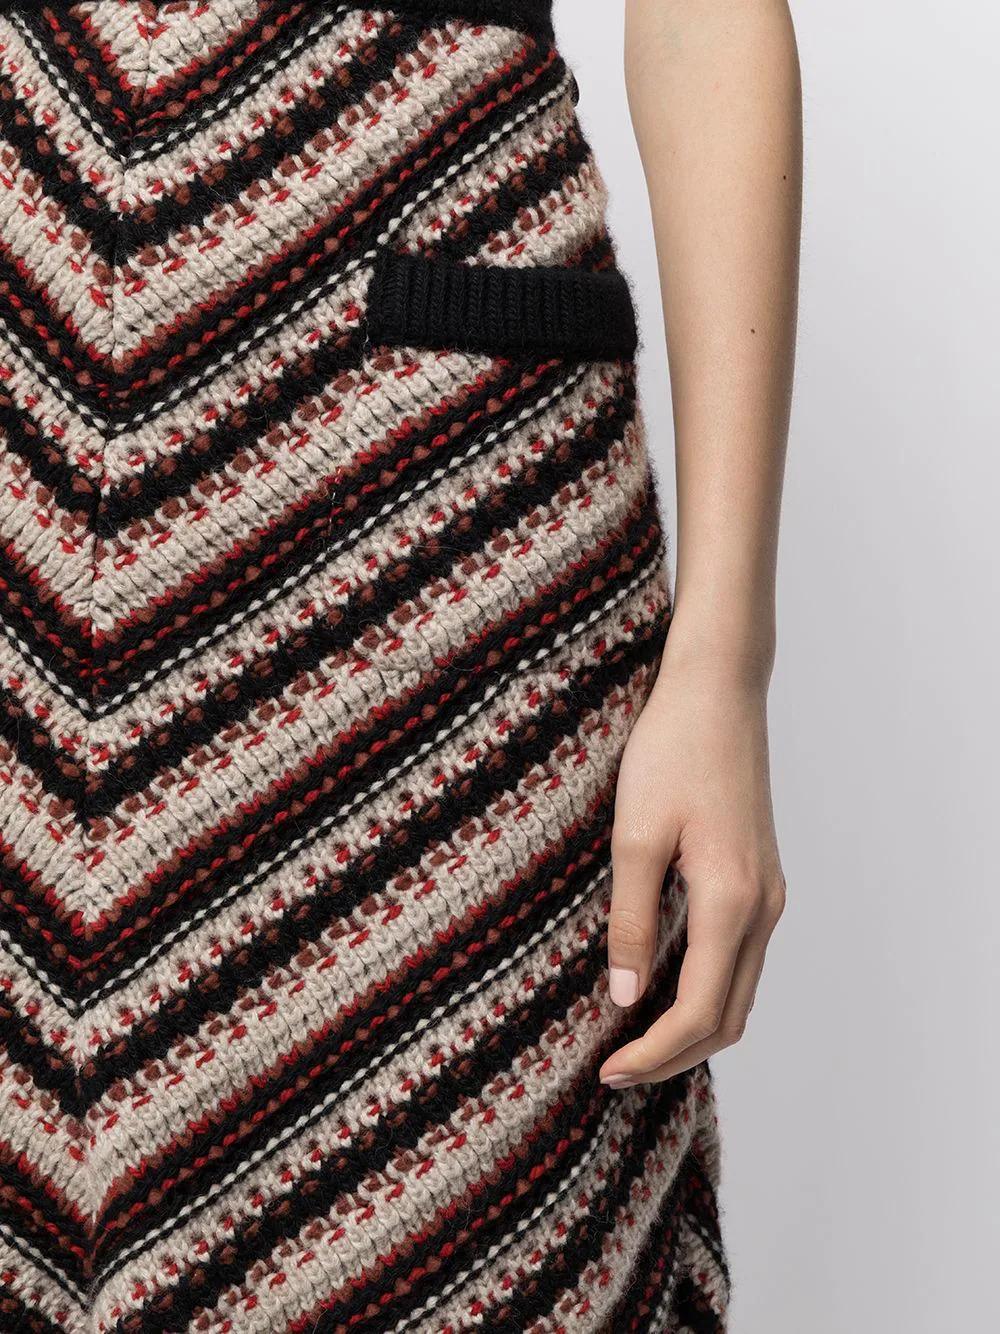 This pre-owned patterned skirt comes from the 2014 Dallas pre-fall collection, crafted from a cashmere and wool blend it takes inspiration from western-style. The skirt creates an effortless statement with a red black and beige chevron pattern